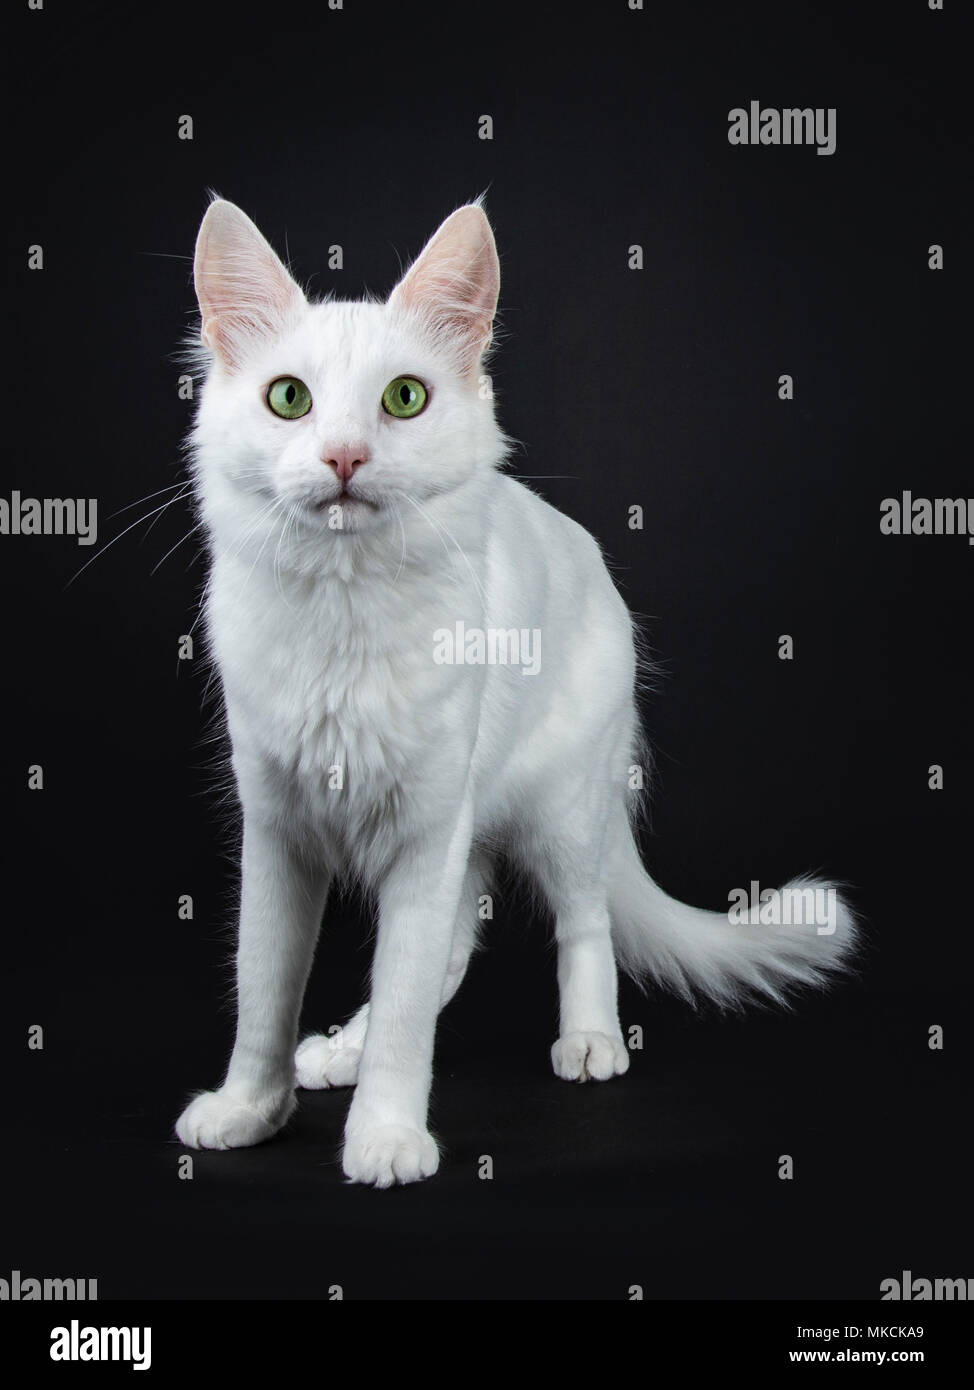 Solid white Turkish Angora cat with green eyes standing slightly side ways isolated on black background looking at camera Stock Photo